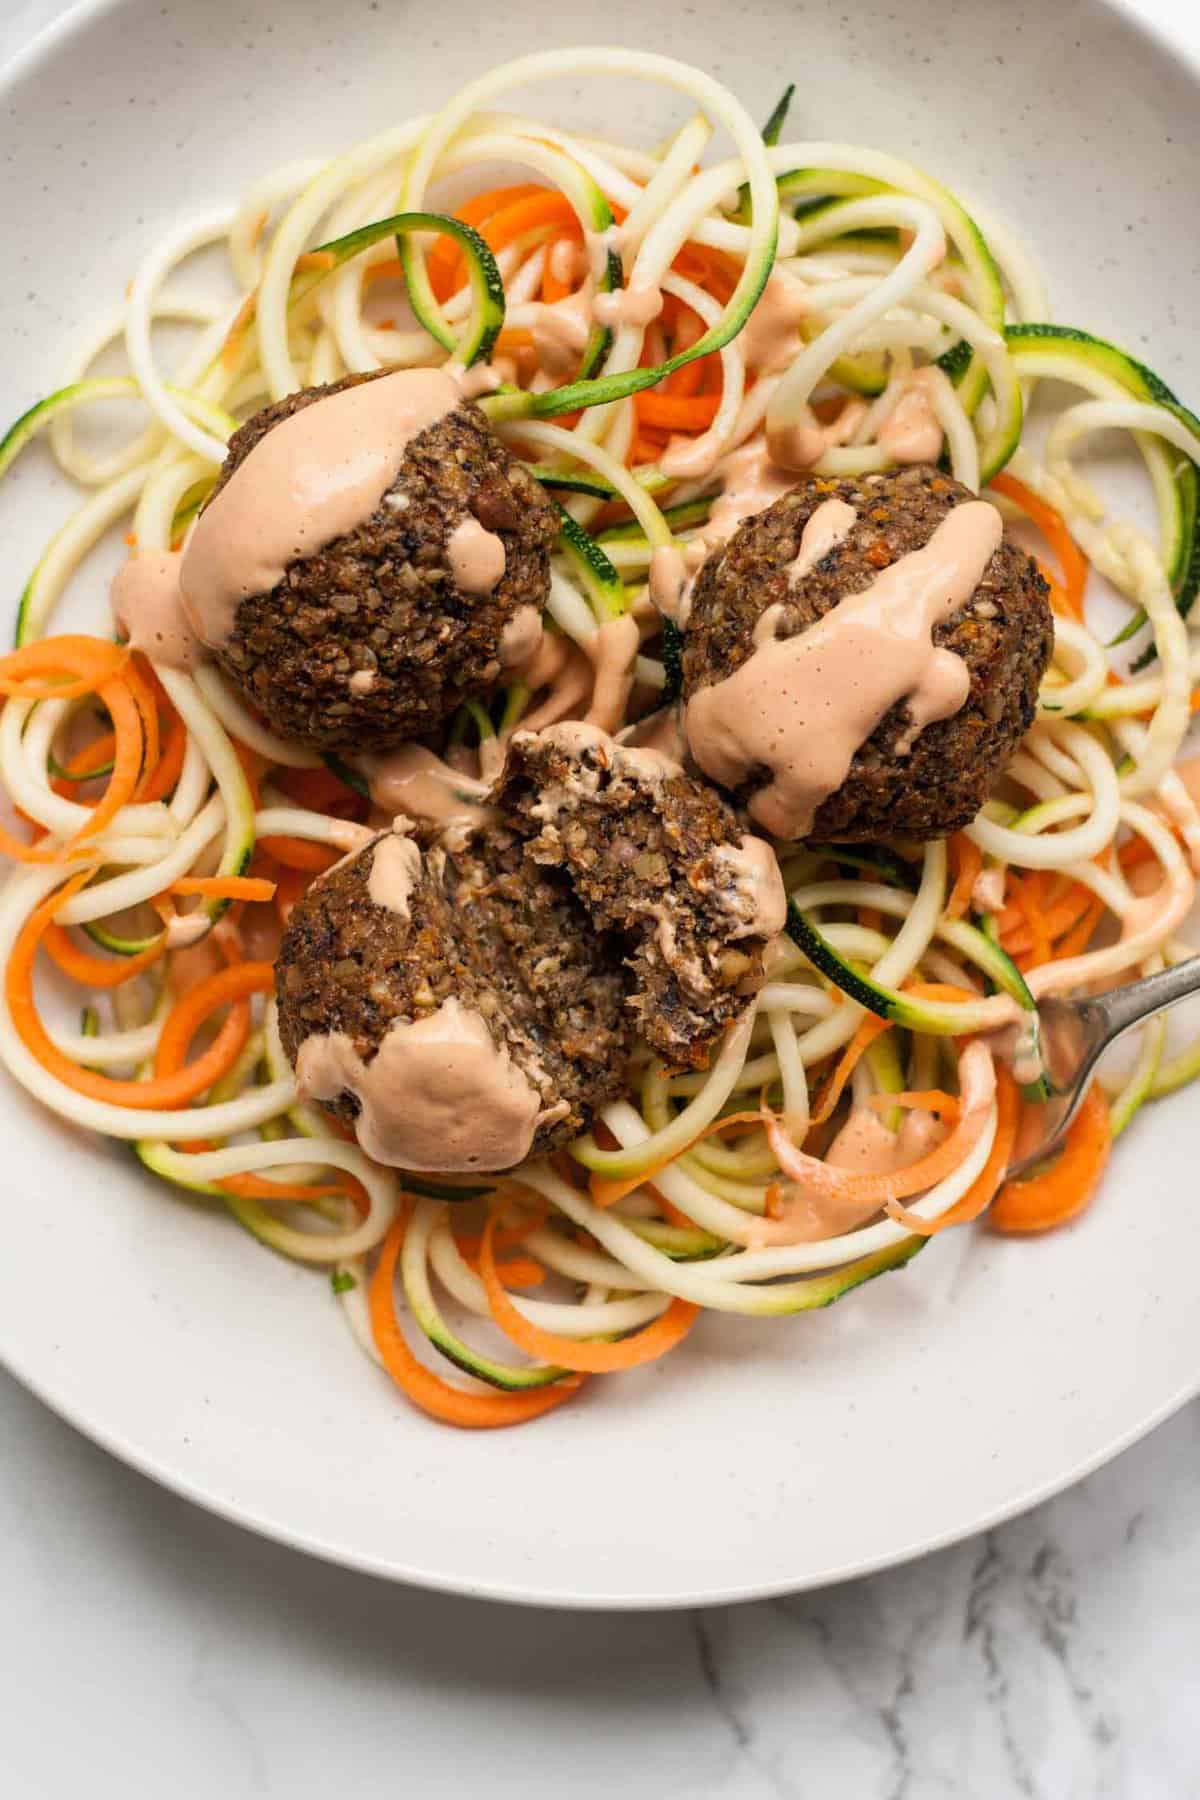 Vegan Meatballs with Creamy Sun-dried Tomato Sauce - these deliciously satisfying vegan meatballs make a perfect packed lunch served with spiralized veggies and a simple vegan sauce! | eatloveeats.com